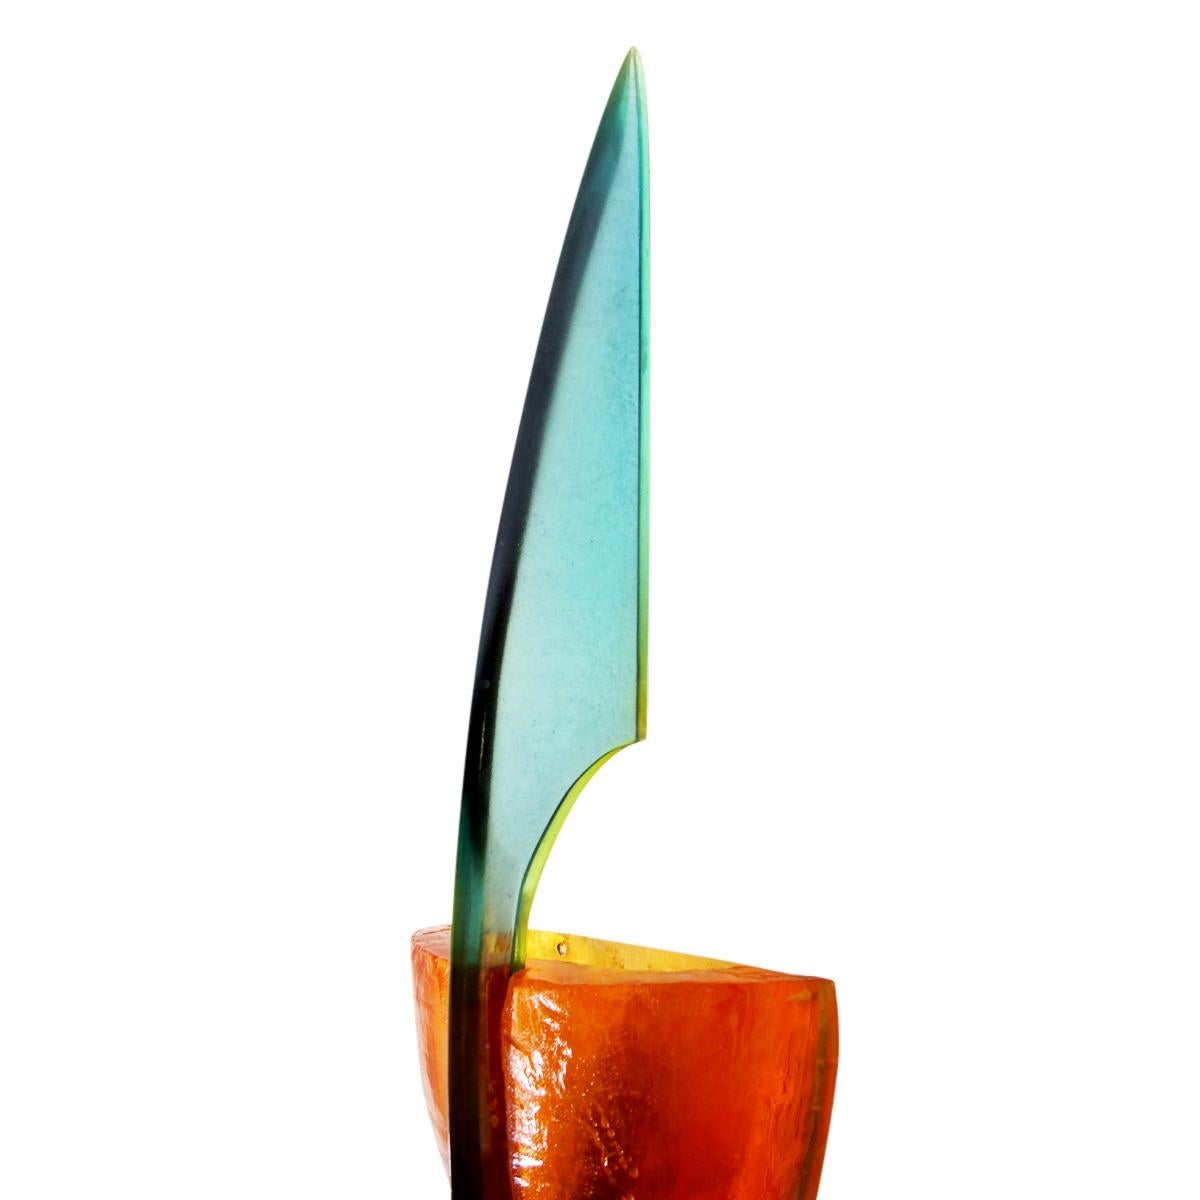 American artist Steve Zoller is unique in his use of color, elemental shapes and flamboyant style. In 1993 he made this beautiful floor lamp together with a table lamp, a sconce and two flower vases in the same luxurious style. The green fixture